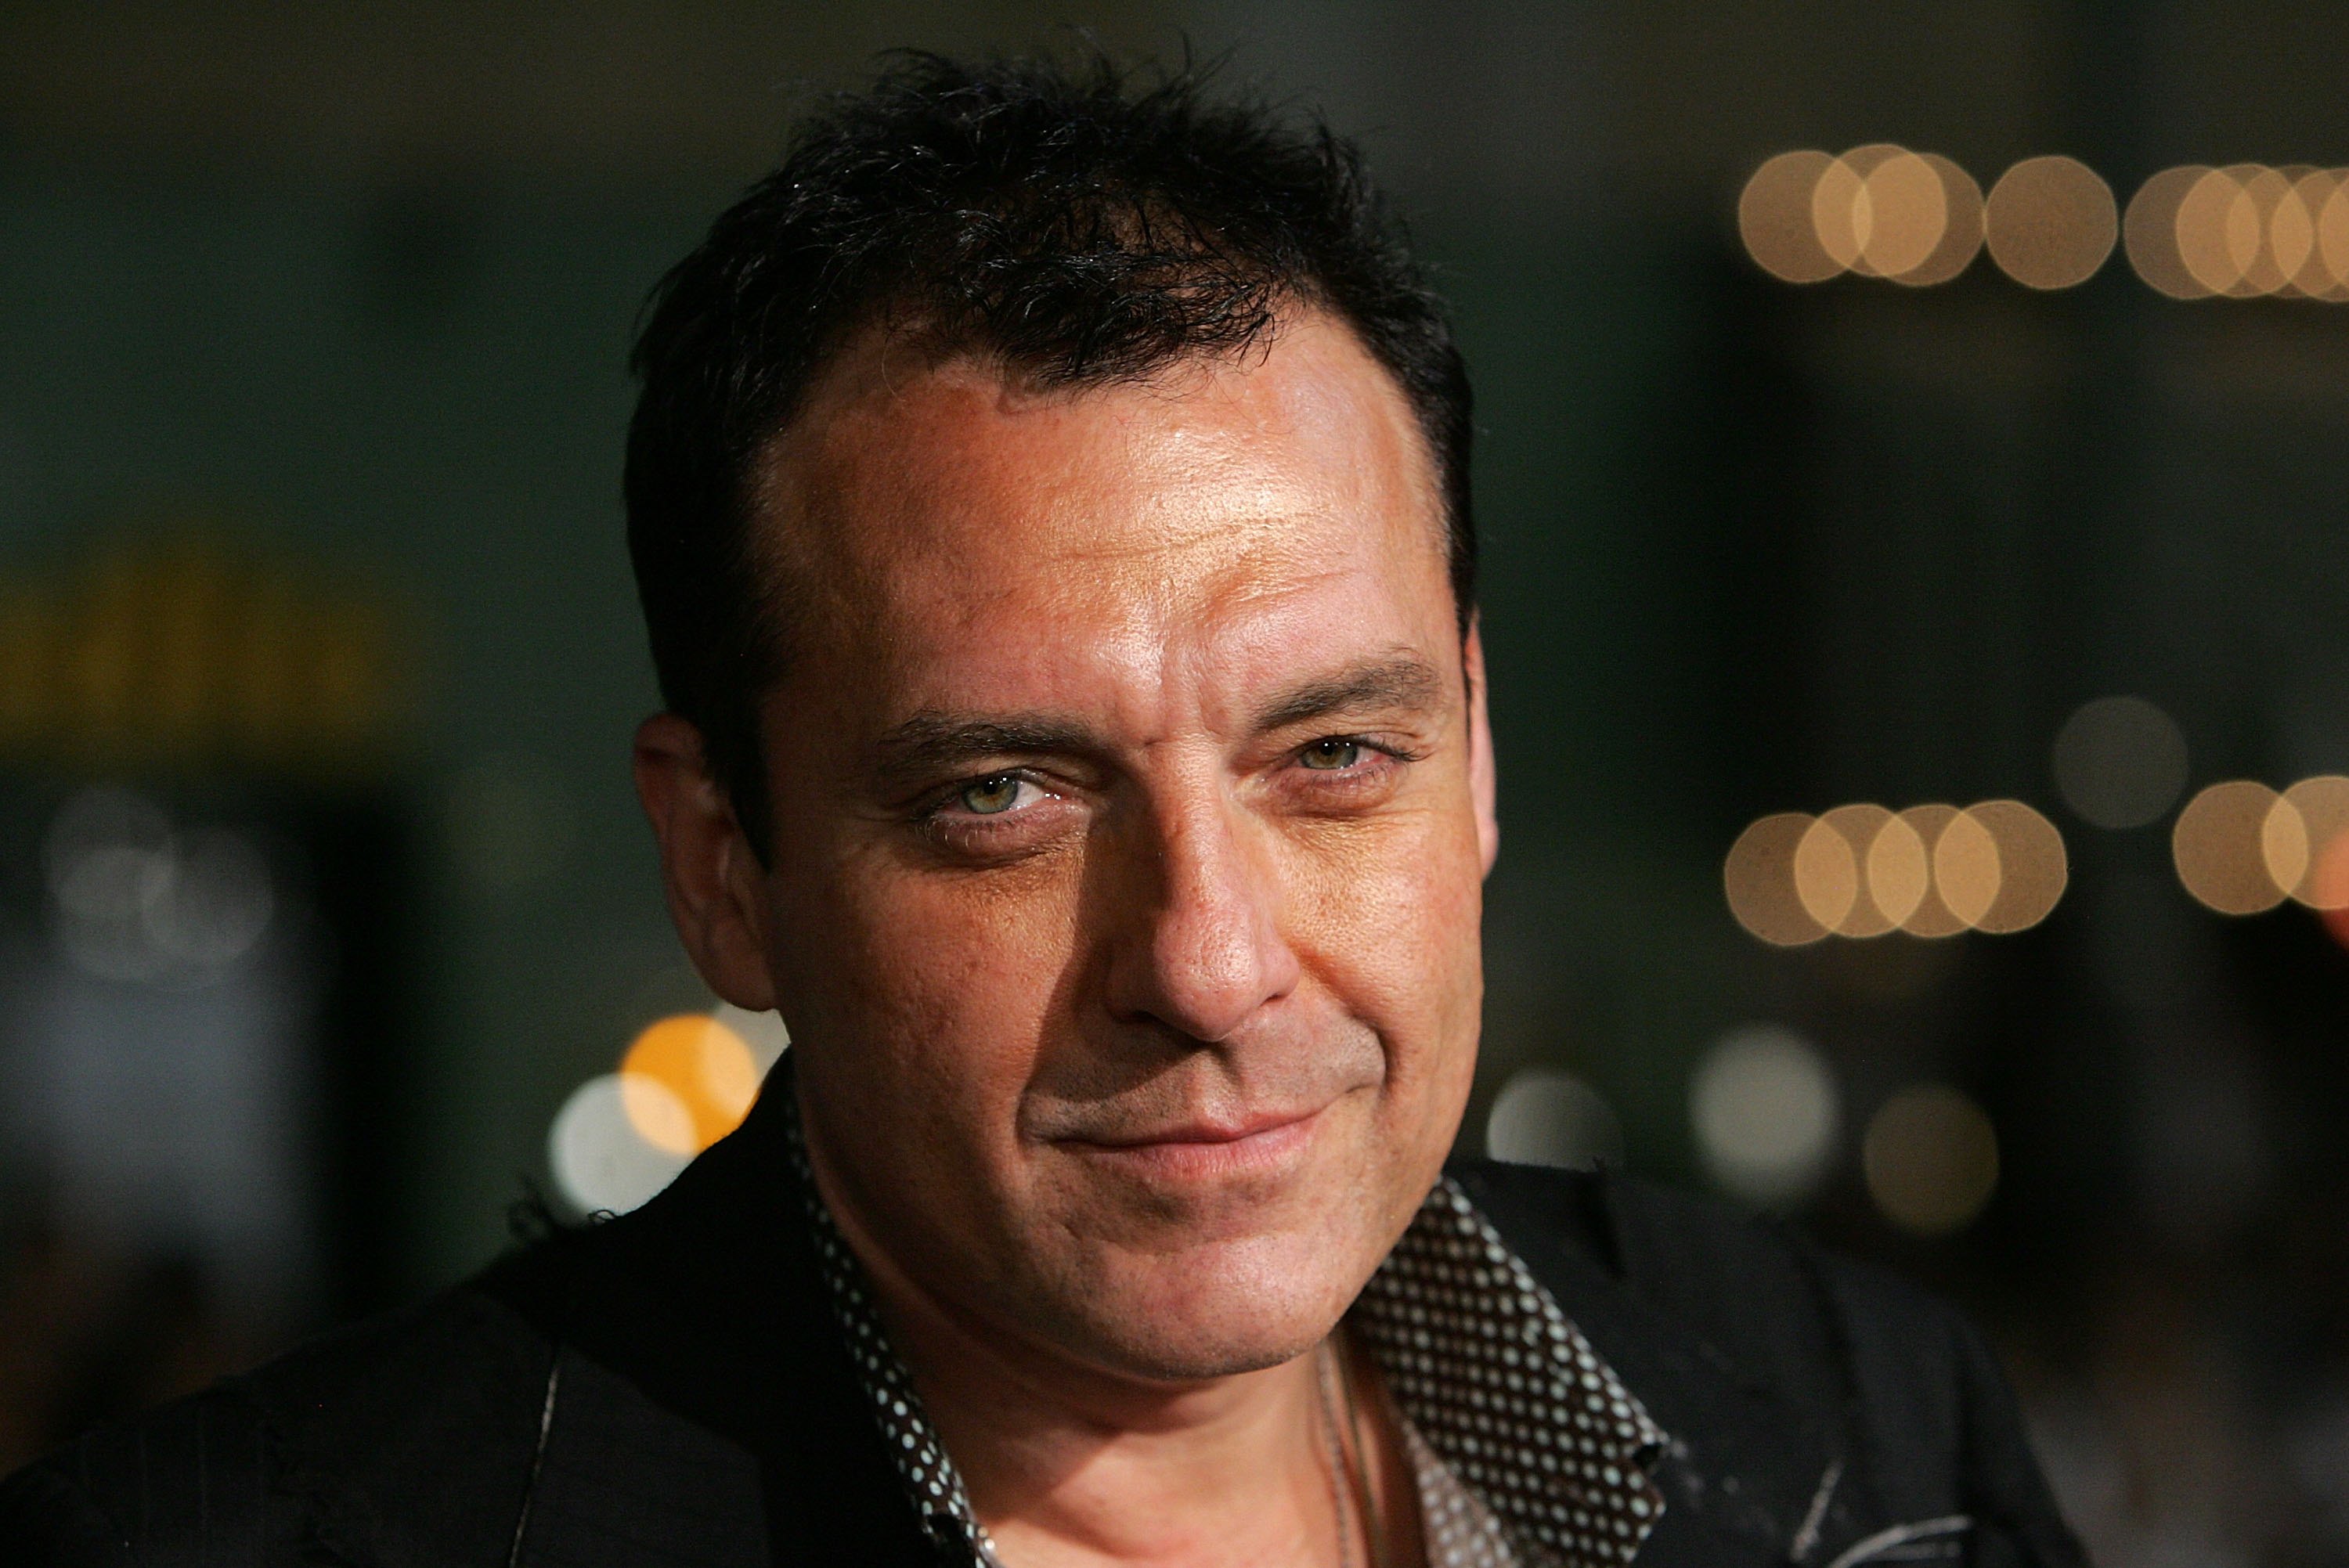 WESTWOOD, CA - NOVEMBER 05:  Actor Tom Sizemore arrives at the  Paramount Vantage premiere of "Babel" held at the FOX Westwood Village theatre on November 5, 2006 in Westwood, California.  (Photo by Frazer Harrison/Getty Images)